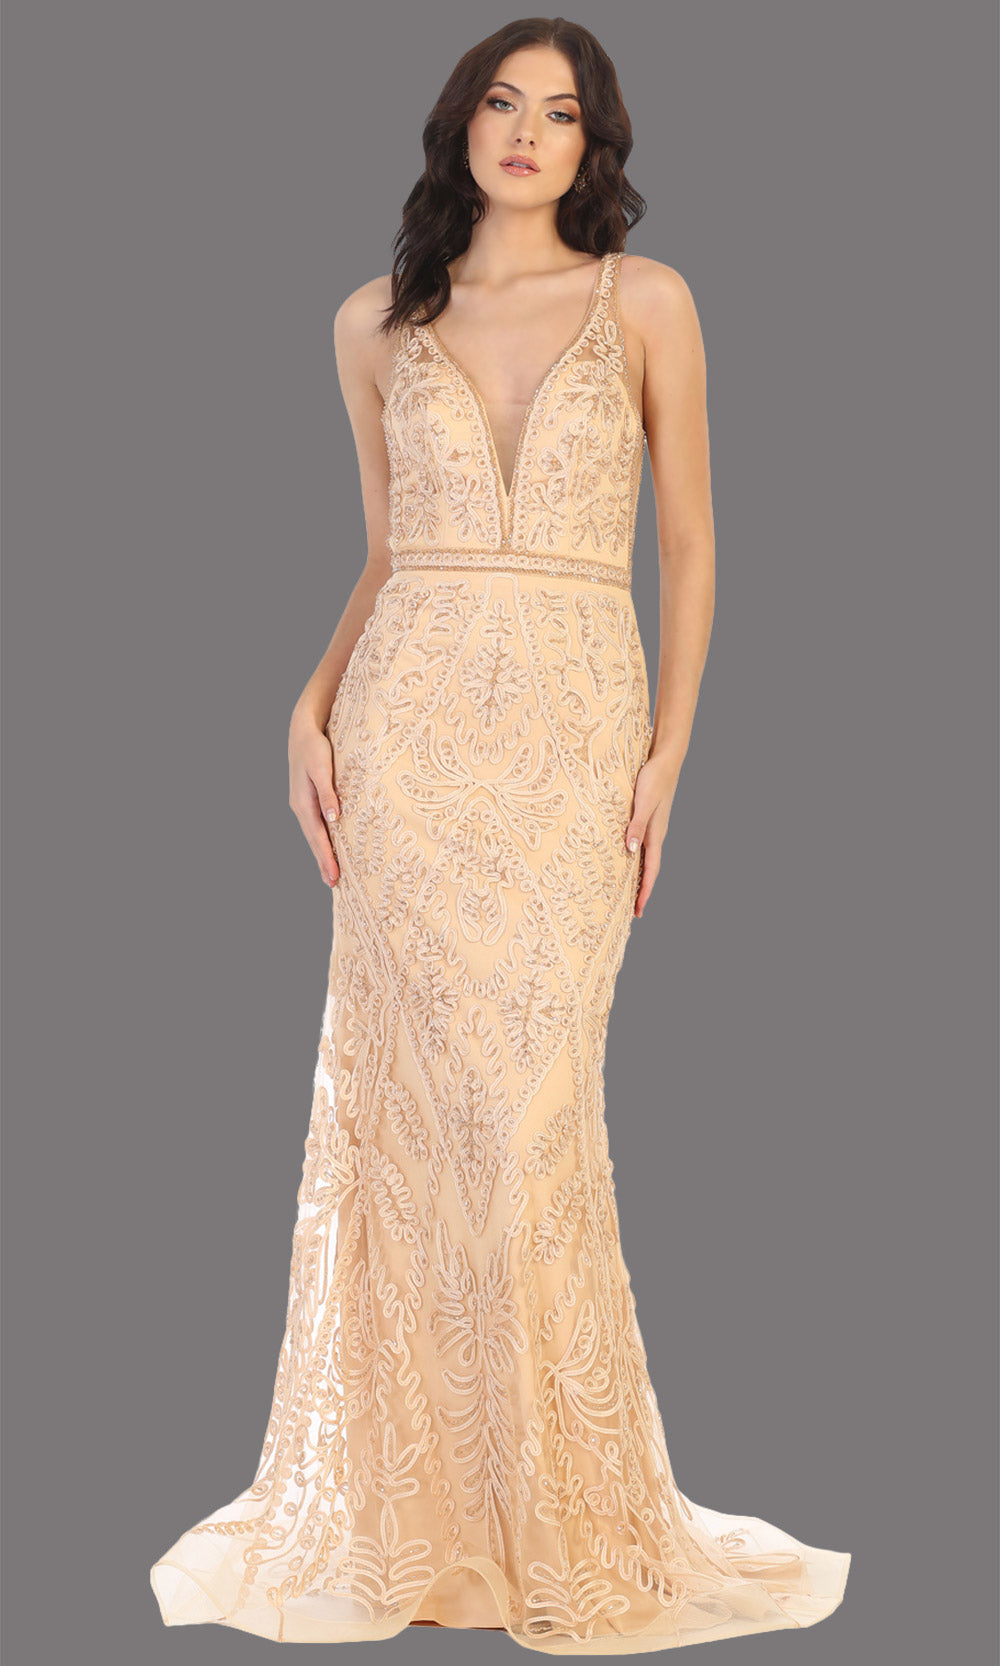 Mayqueen MQ1758 long champagne lace evening fitted dress w/low back & wide straps. Full length champagne gown is perfect for enagagement/e-shoot dress, wedding reception dress, indowestern gown, formal evening party dress, prom. Plus sizes avail